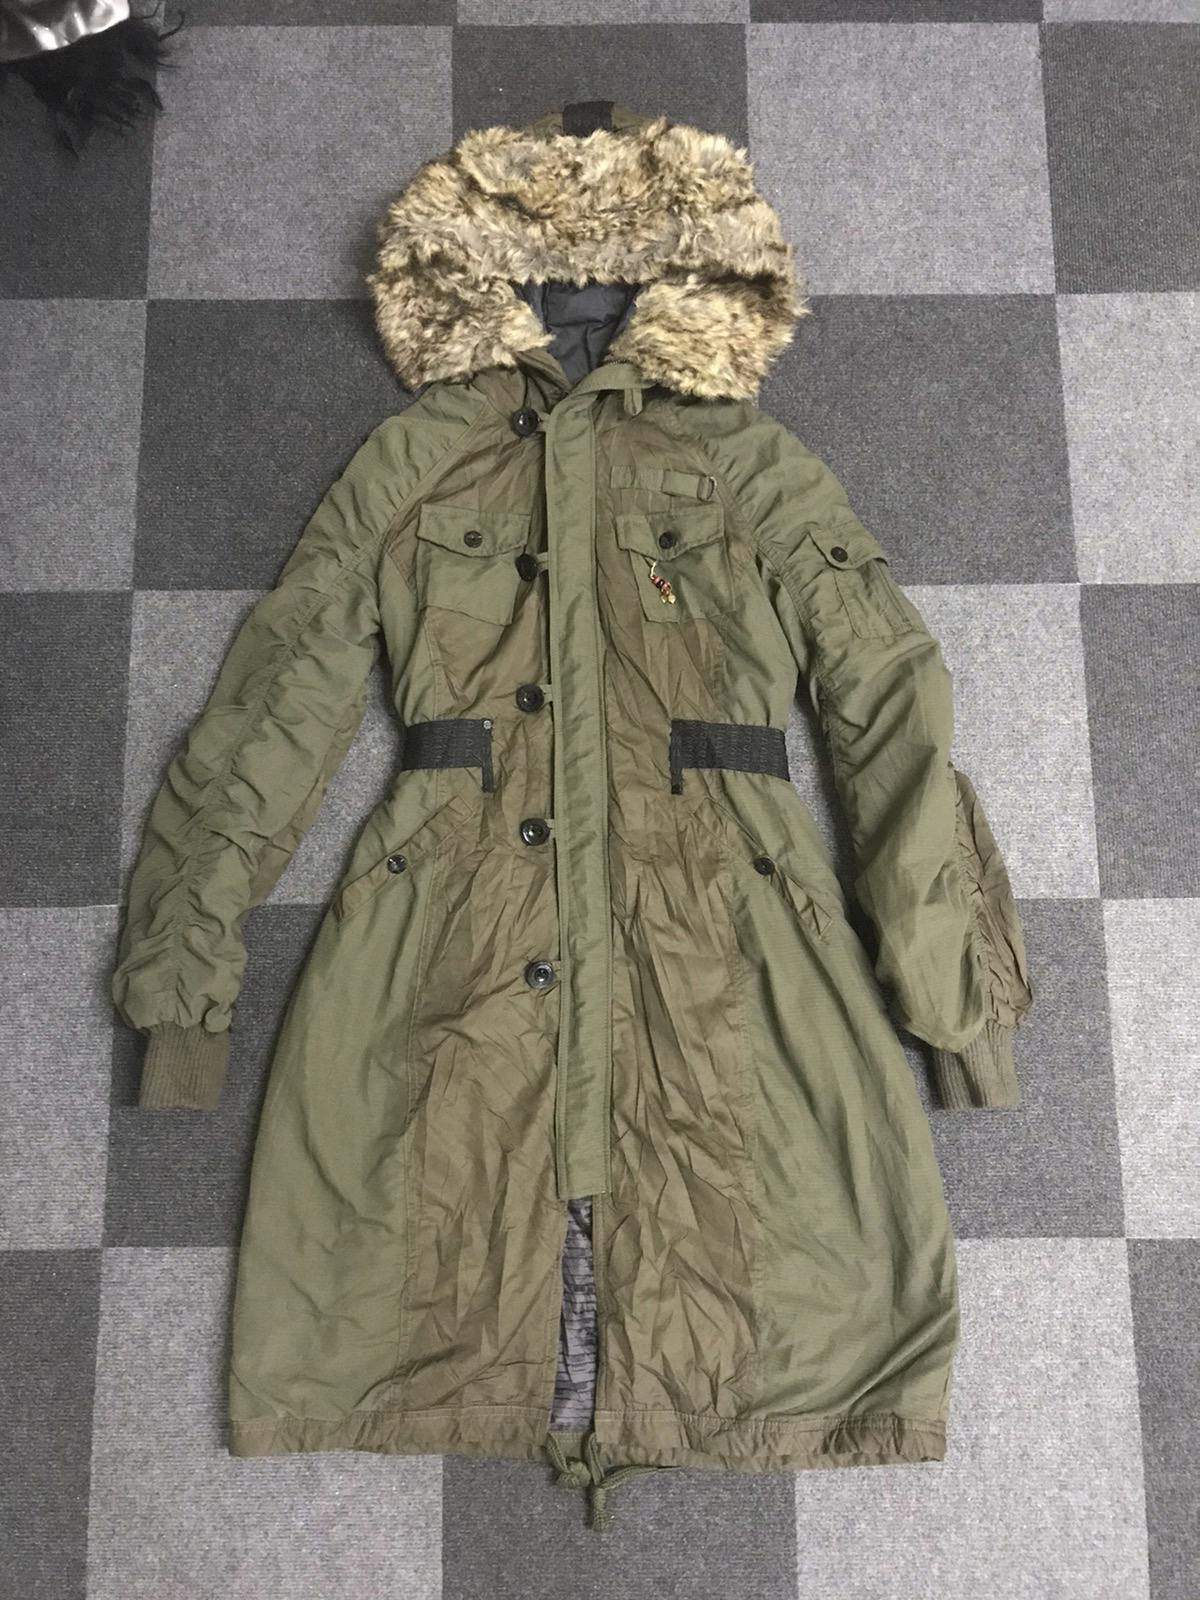 PAR7 DIESEL Italy Very Rare Archival Two Tone Military Parka - 1